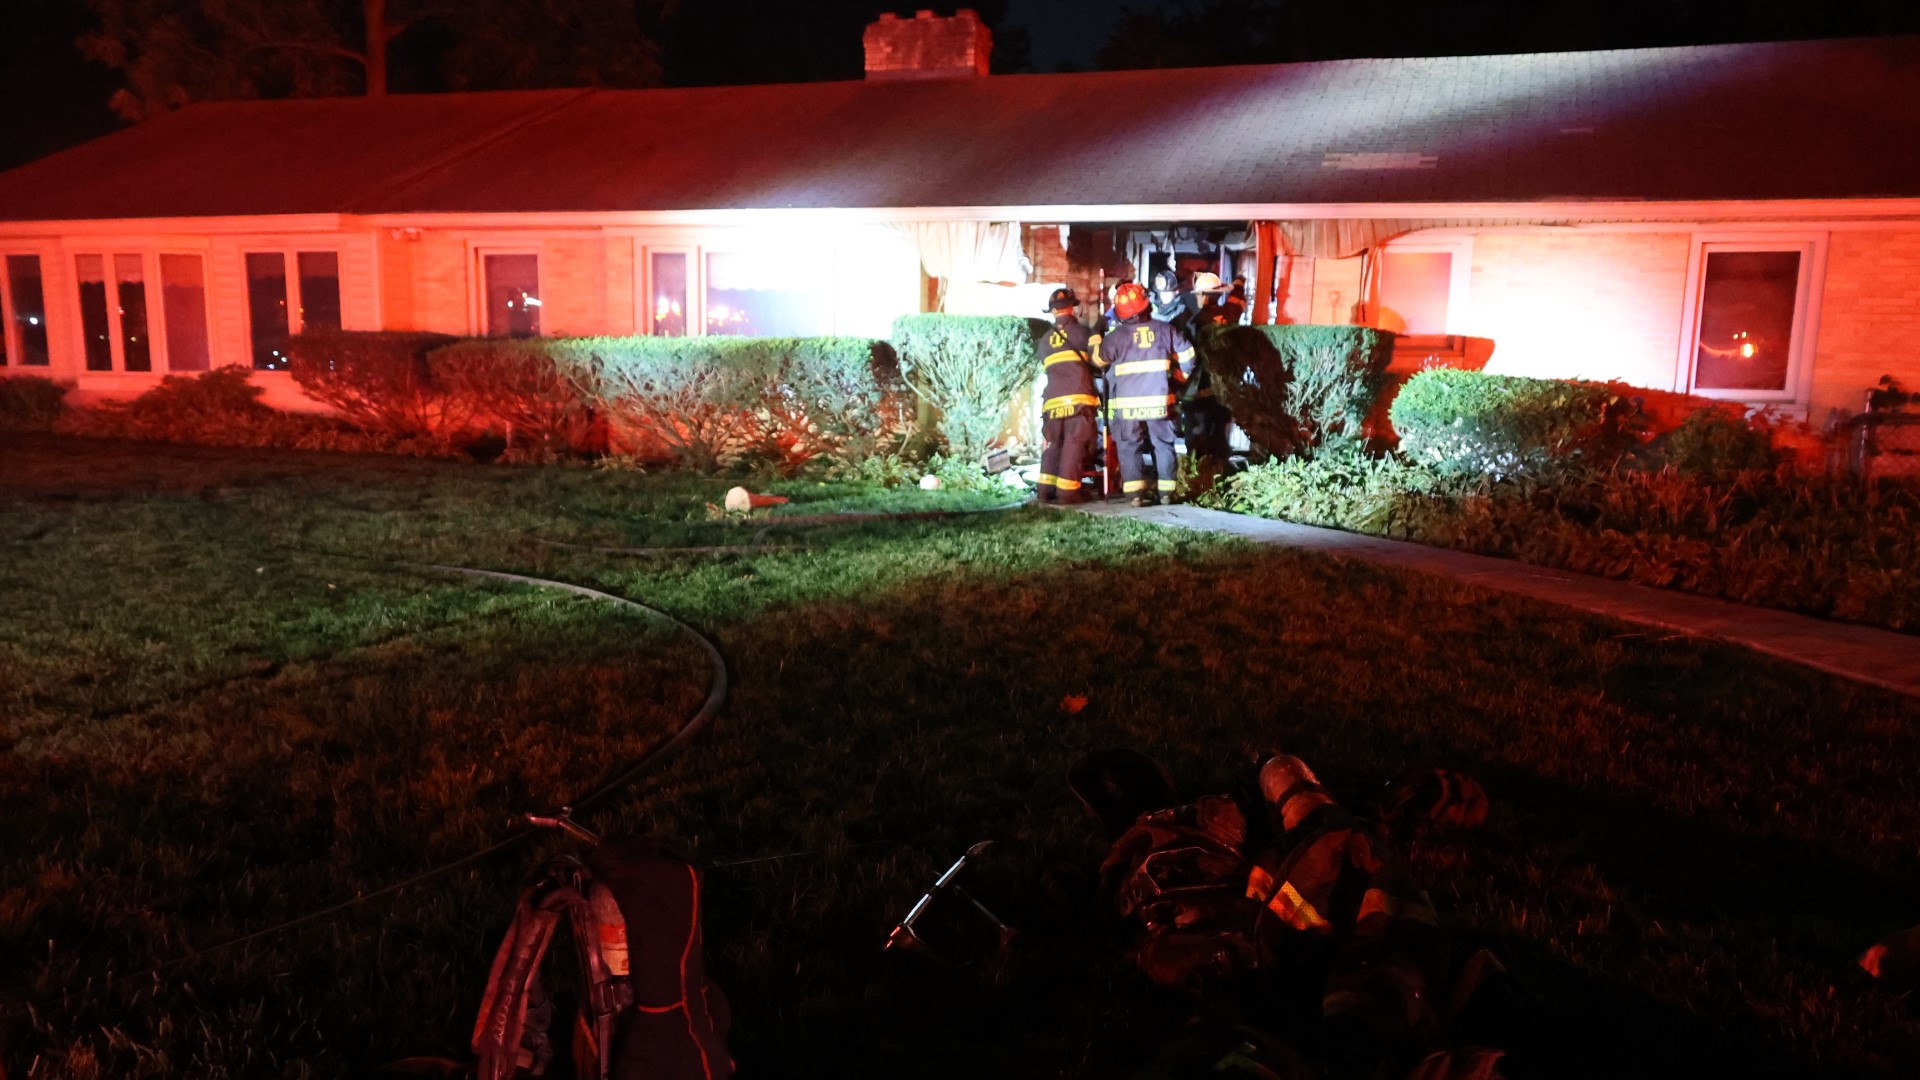 The fire happened around 9:20 p.m. Monday in the 3900 block of Devon Drive on the near east side of Indianapolis.